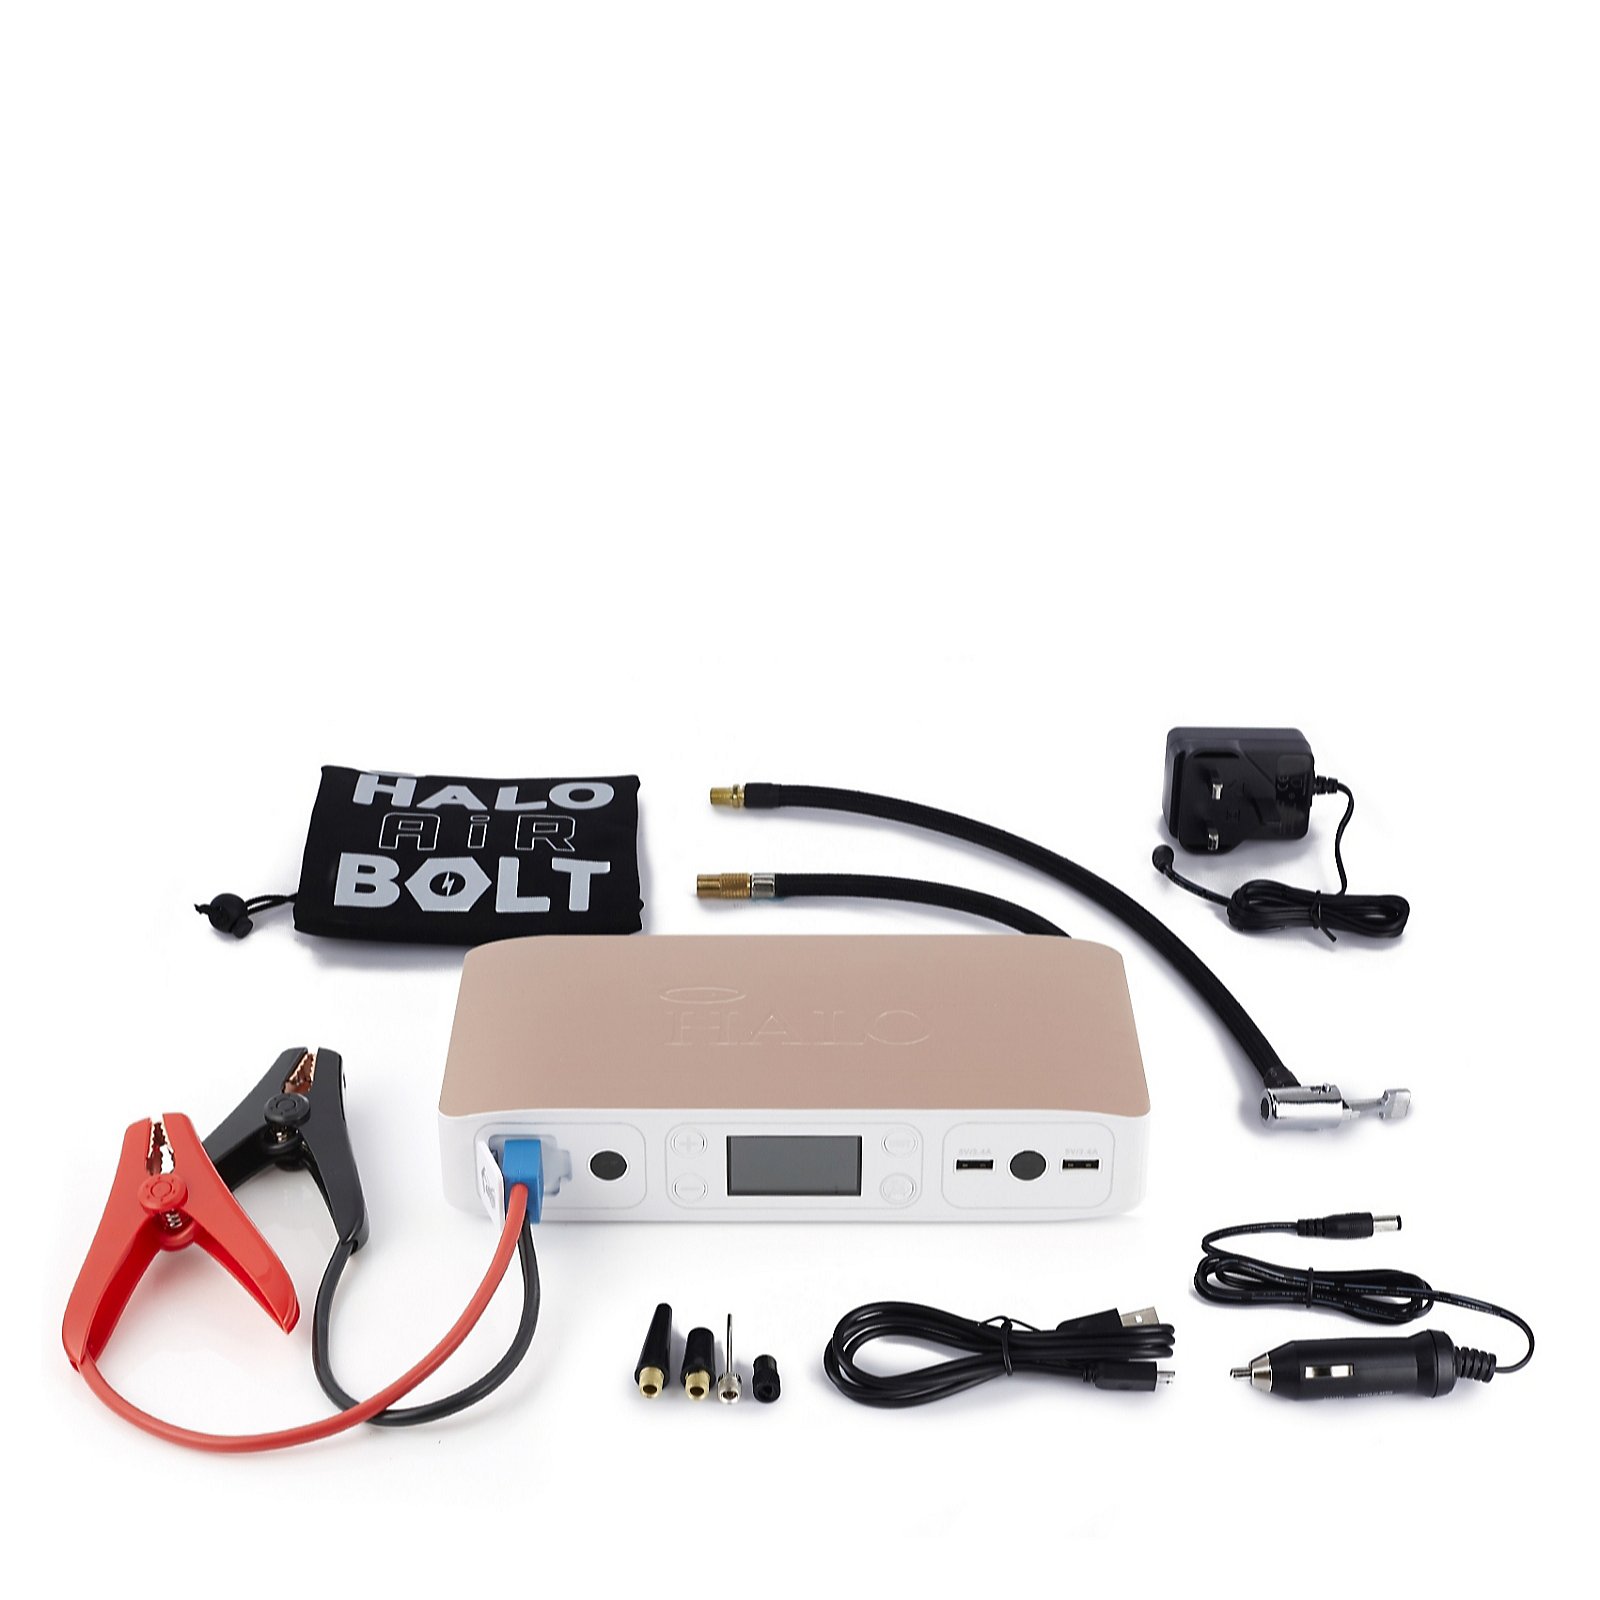 4 Interchangeable Air Nozzles Rose Gold Extra Accessory Kit Car Jump Starter HALO Bolt Air 58830 Mwh Emergency Power Kit with Tire Pump and Car Charger 